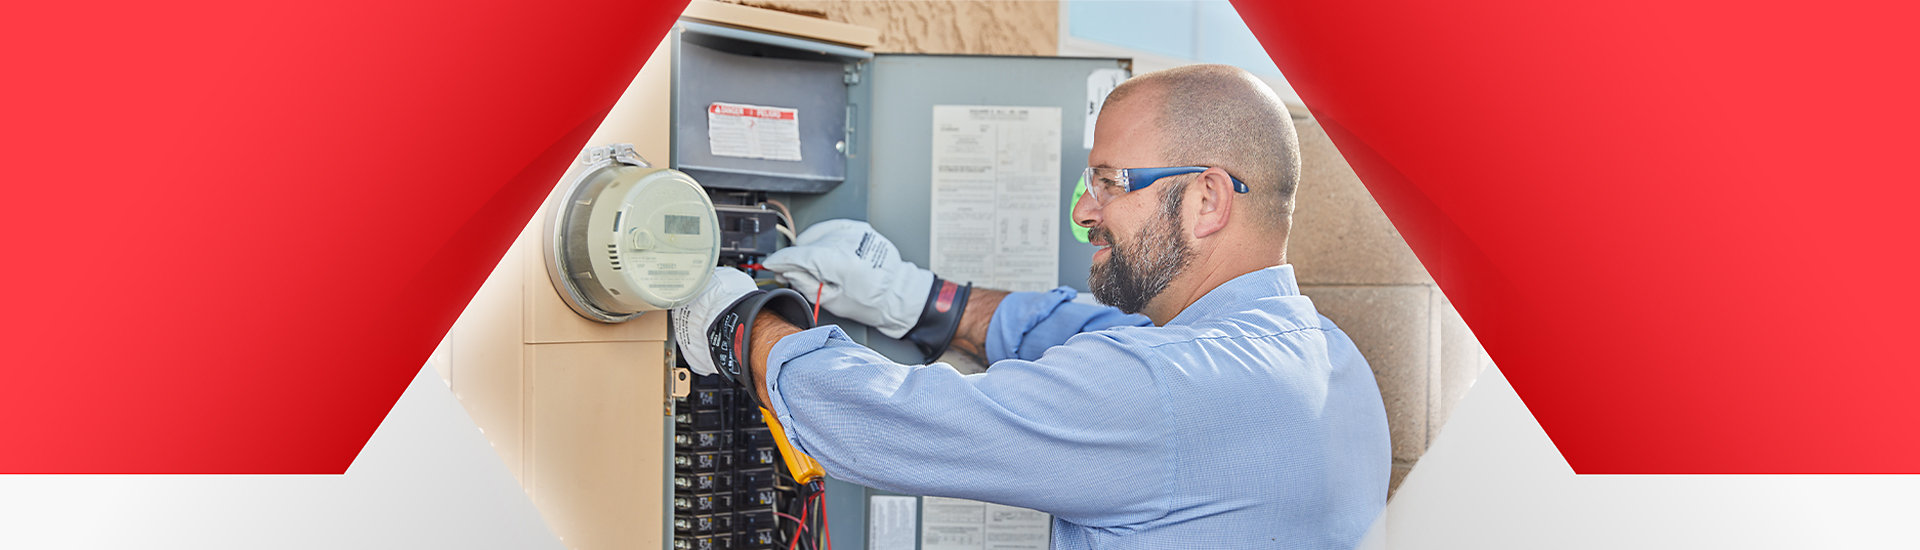 Technician Working on Electrical Panel